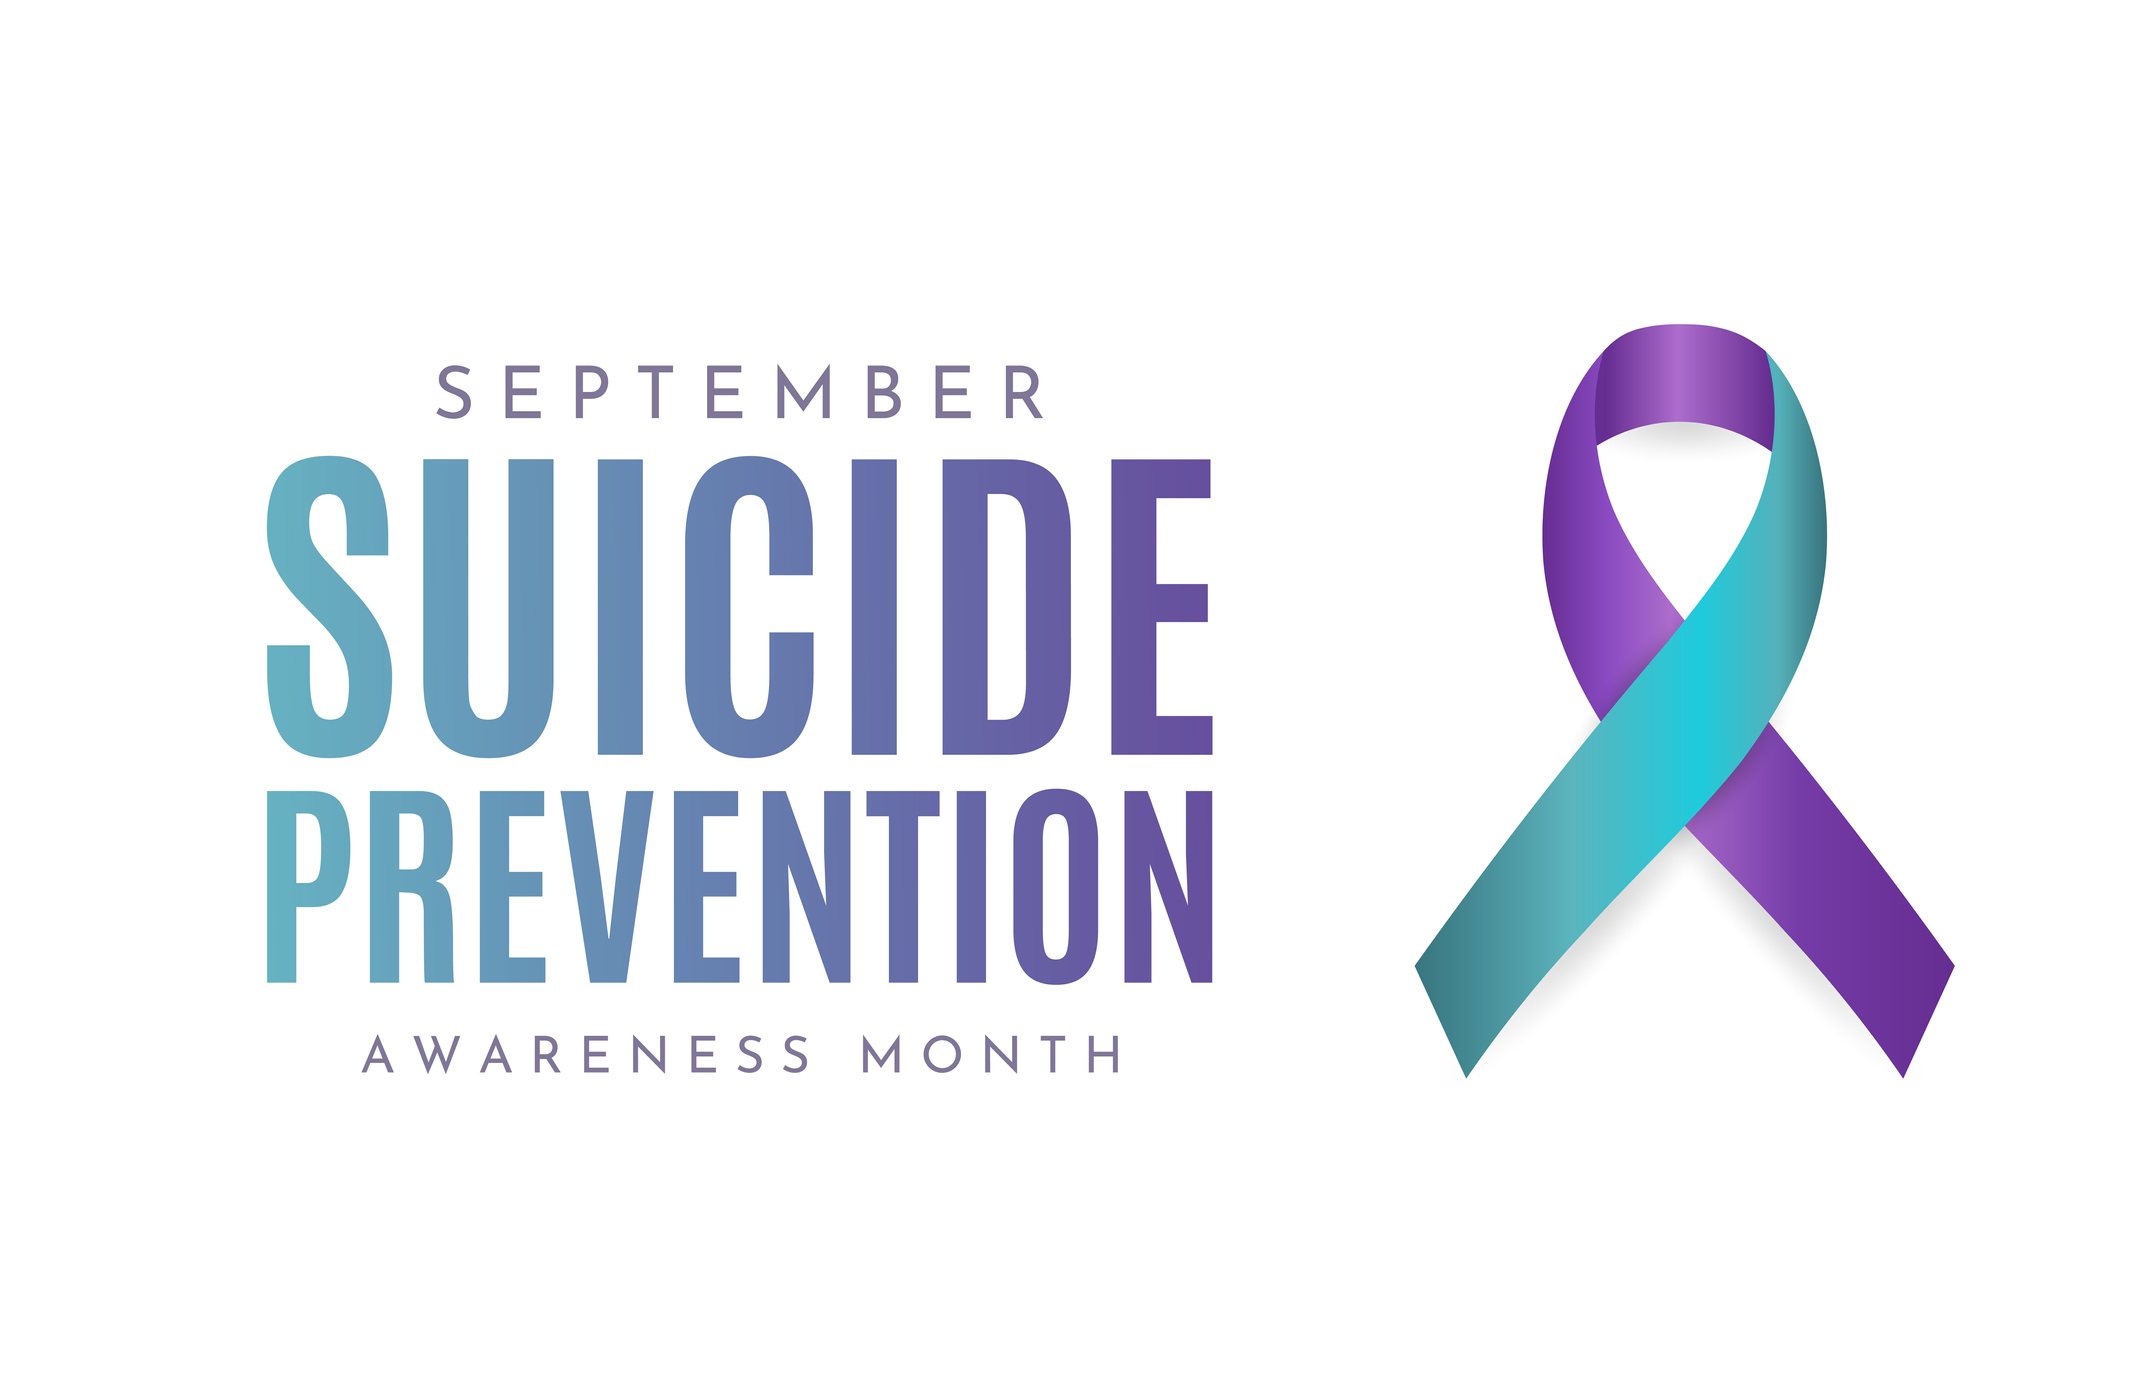 September is Suicide Prevention Awareness Month; here’s what you need to know